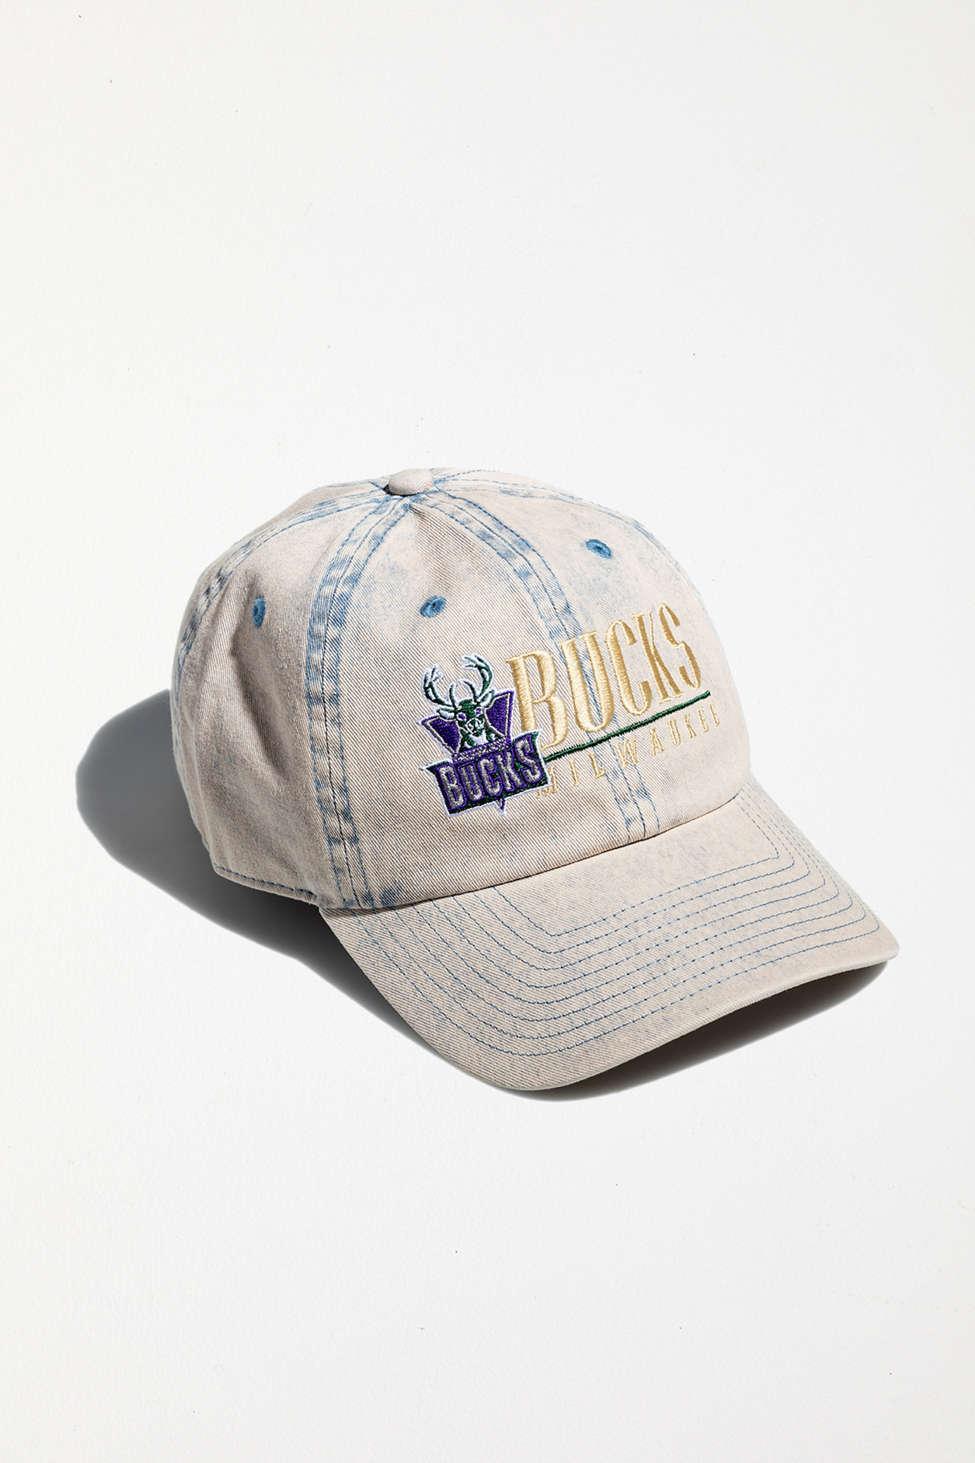 Mitchell & Ness Milwaukee Bucks NBA Strapback Hat  Urban Outfitters Japan  - Clothing, Music, Home & Accessories